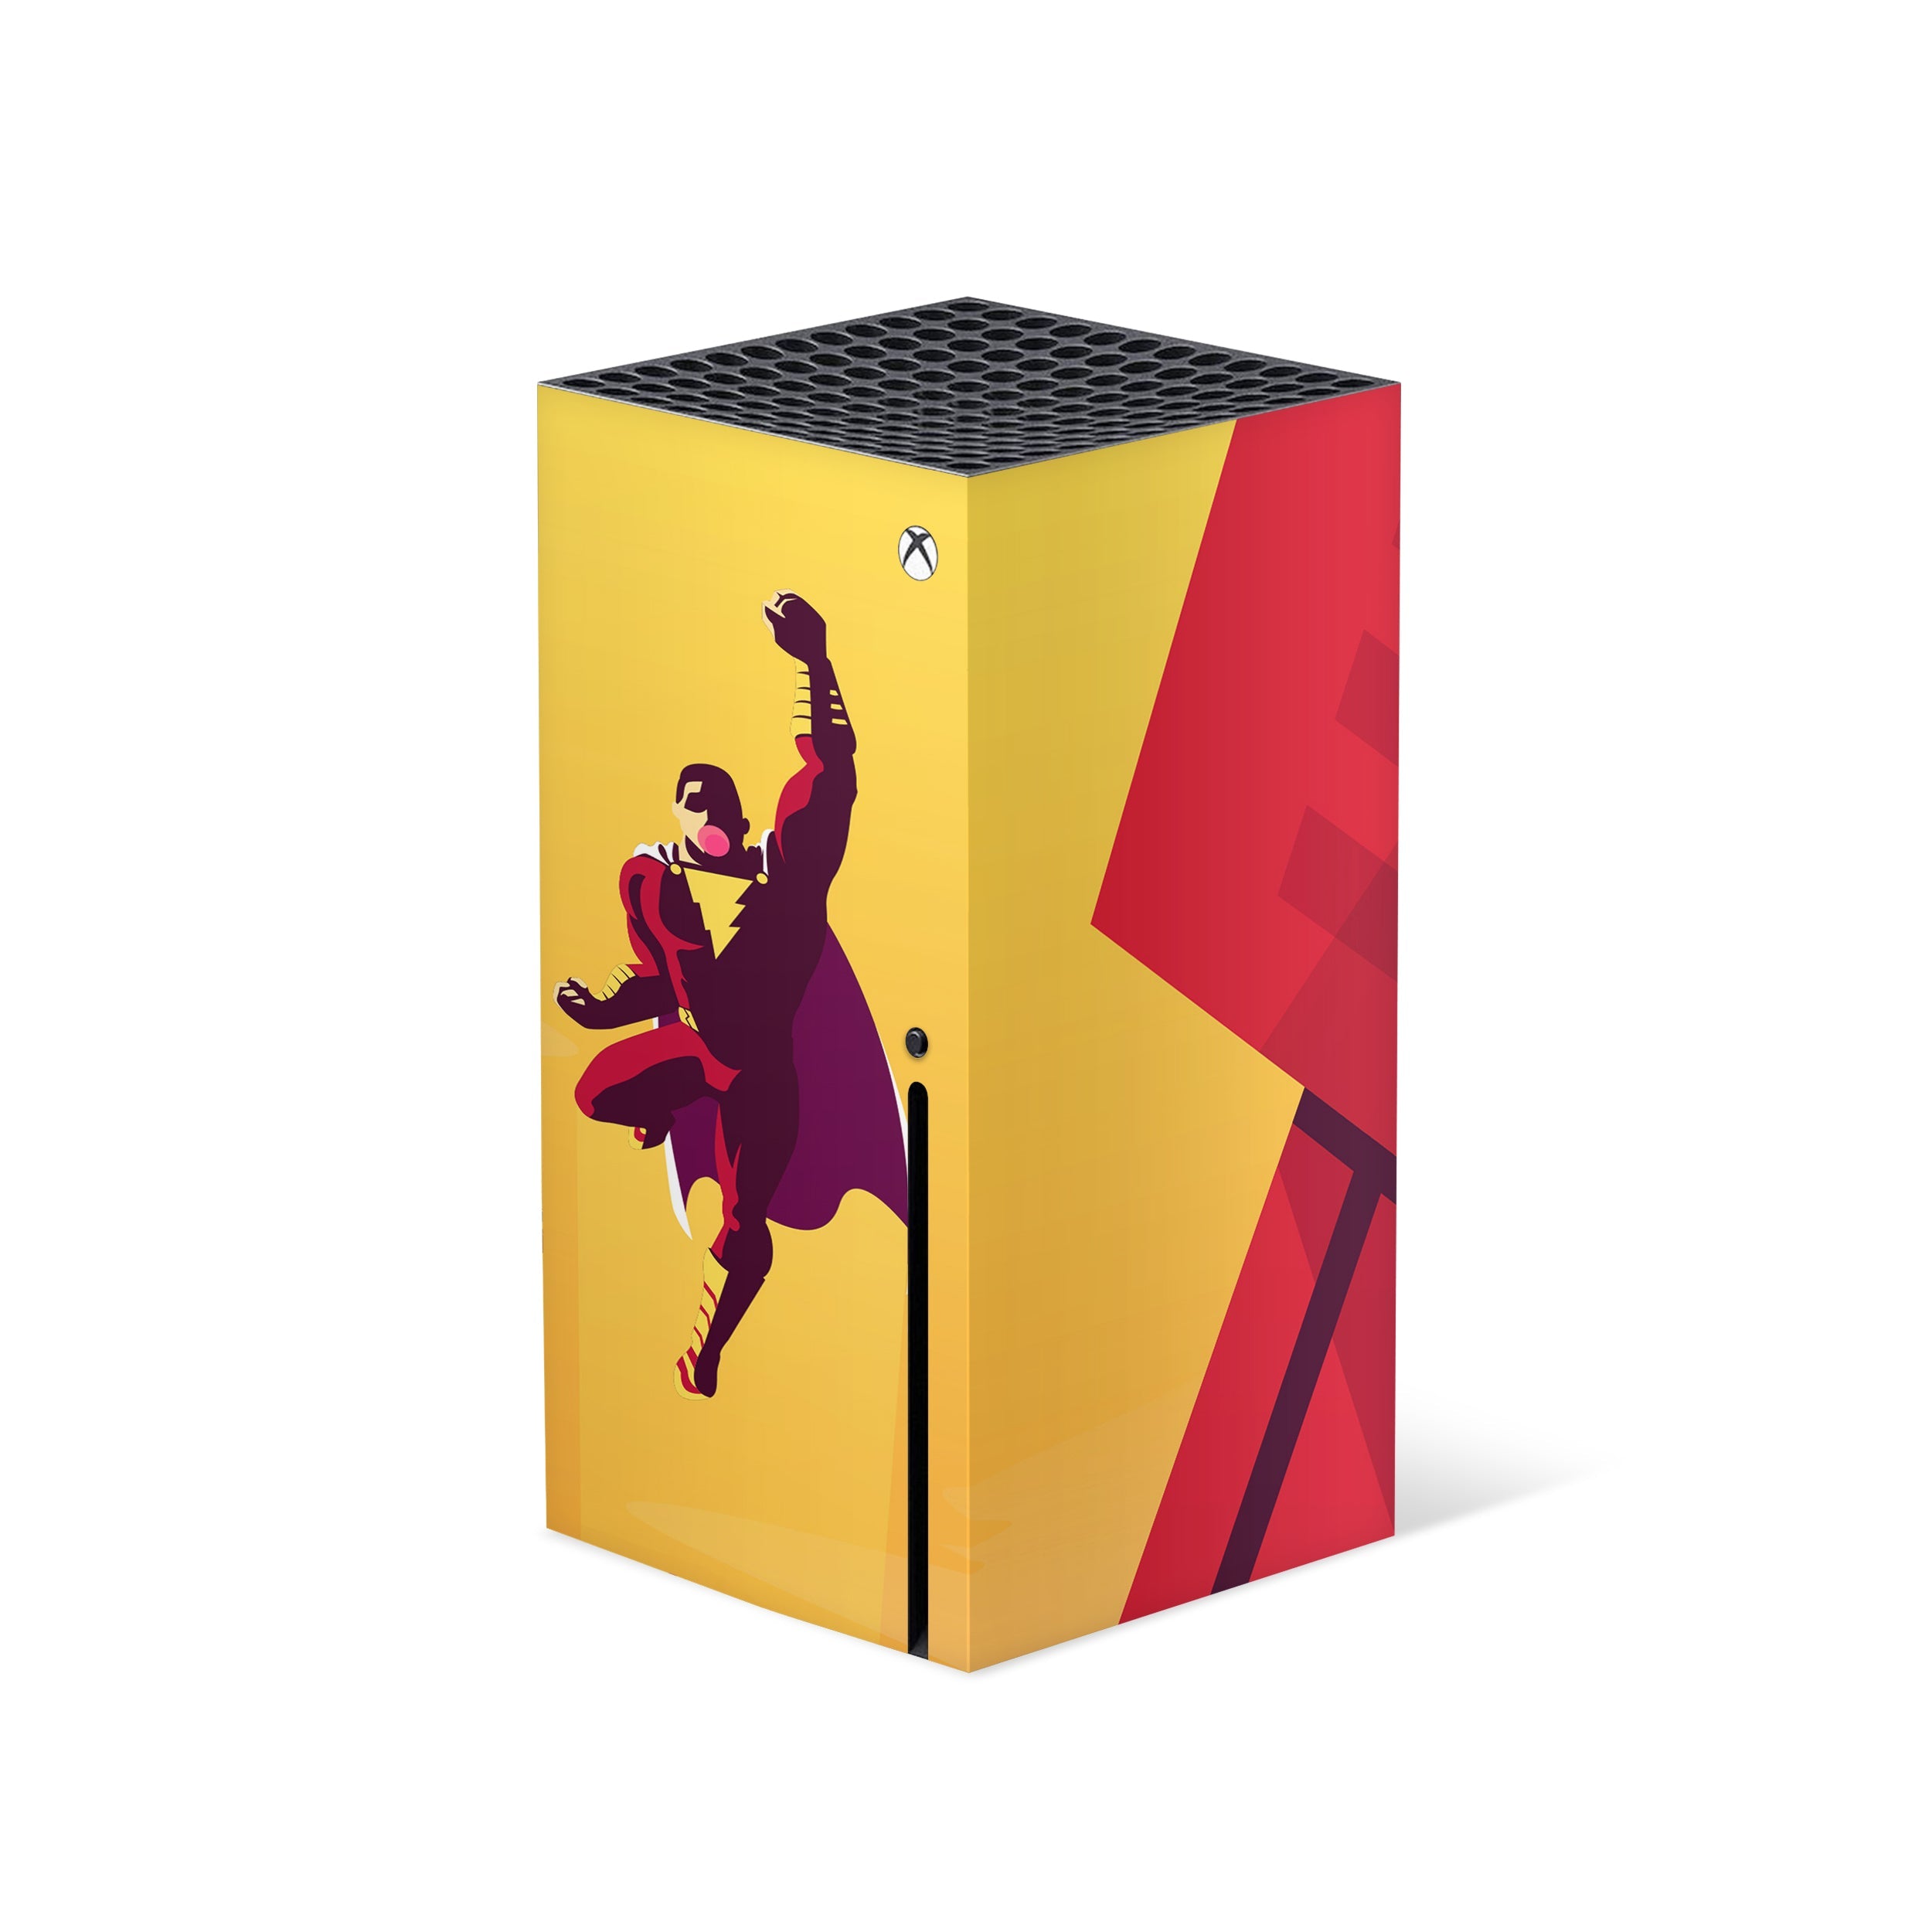 A video game skin featuring a DC Comics Shazam design for the Xbox Series X.